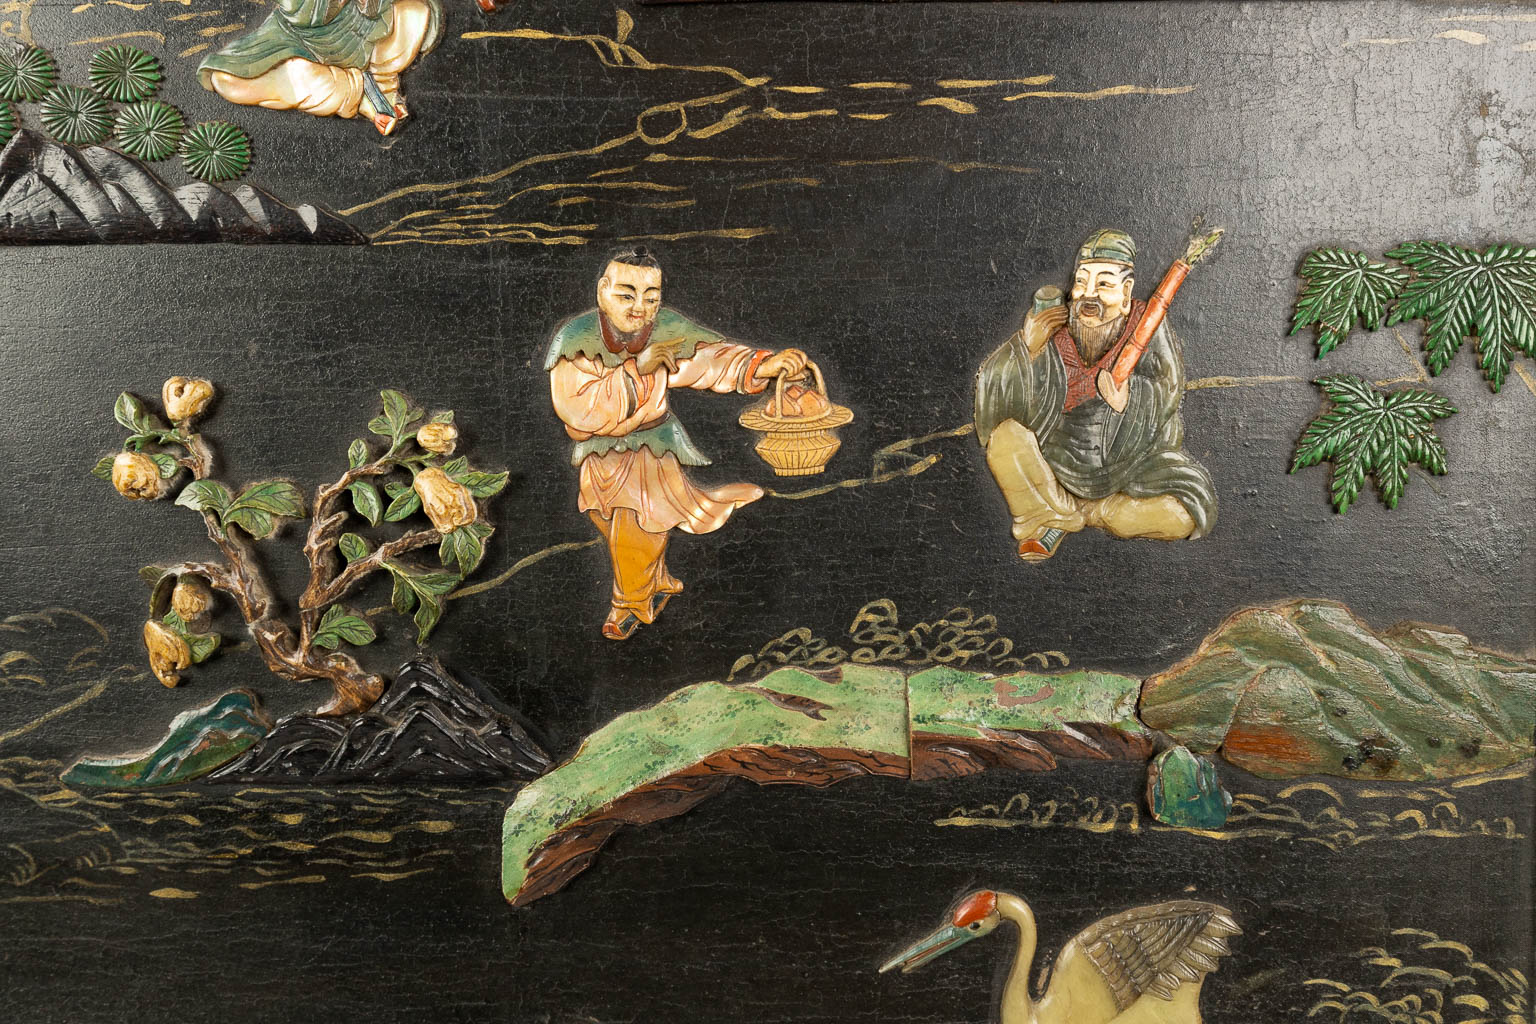 A Chinese sculptured table screen with images of the 8 immortals, cranes, deer and pine trees. (H:80cm)